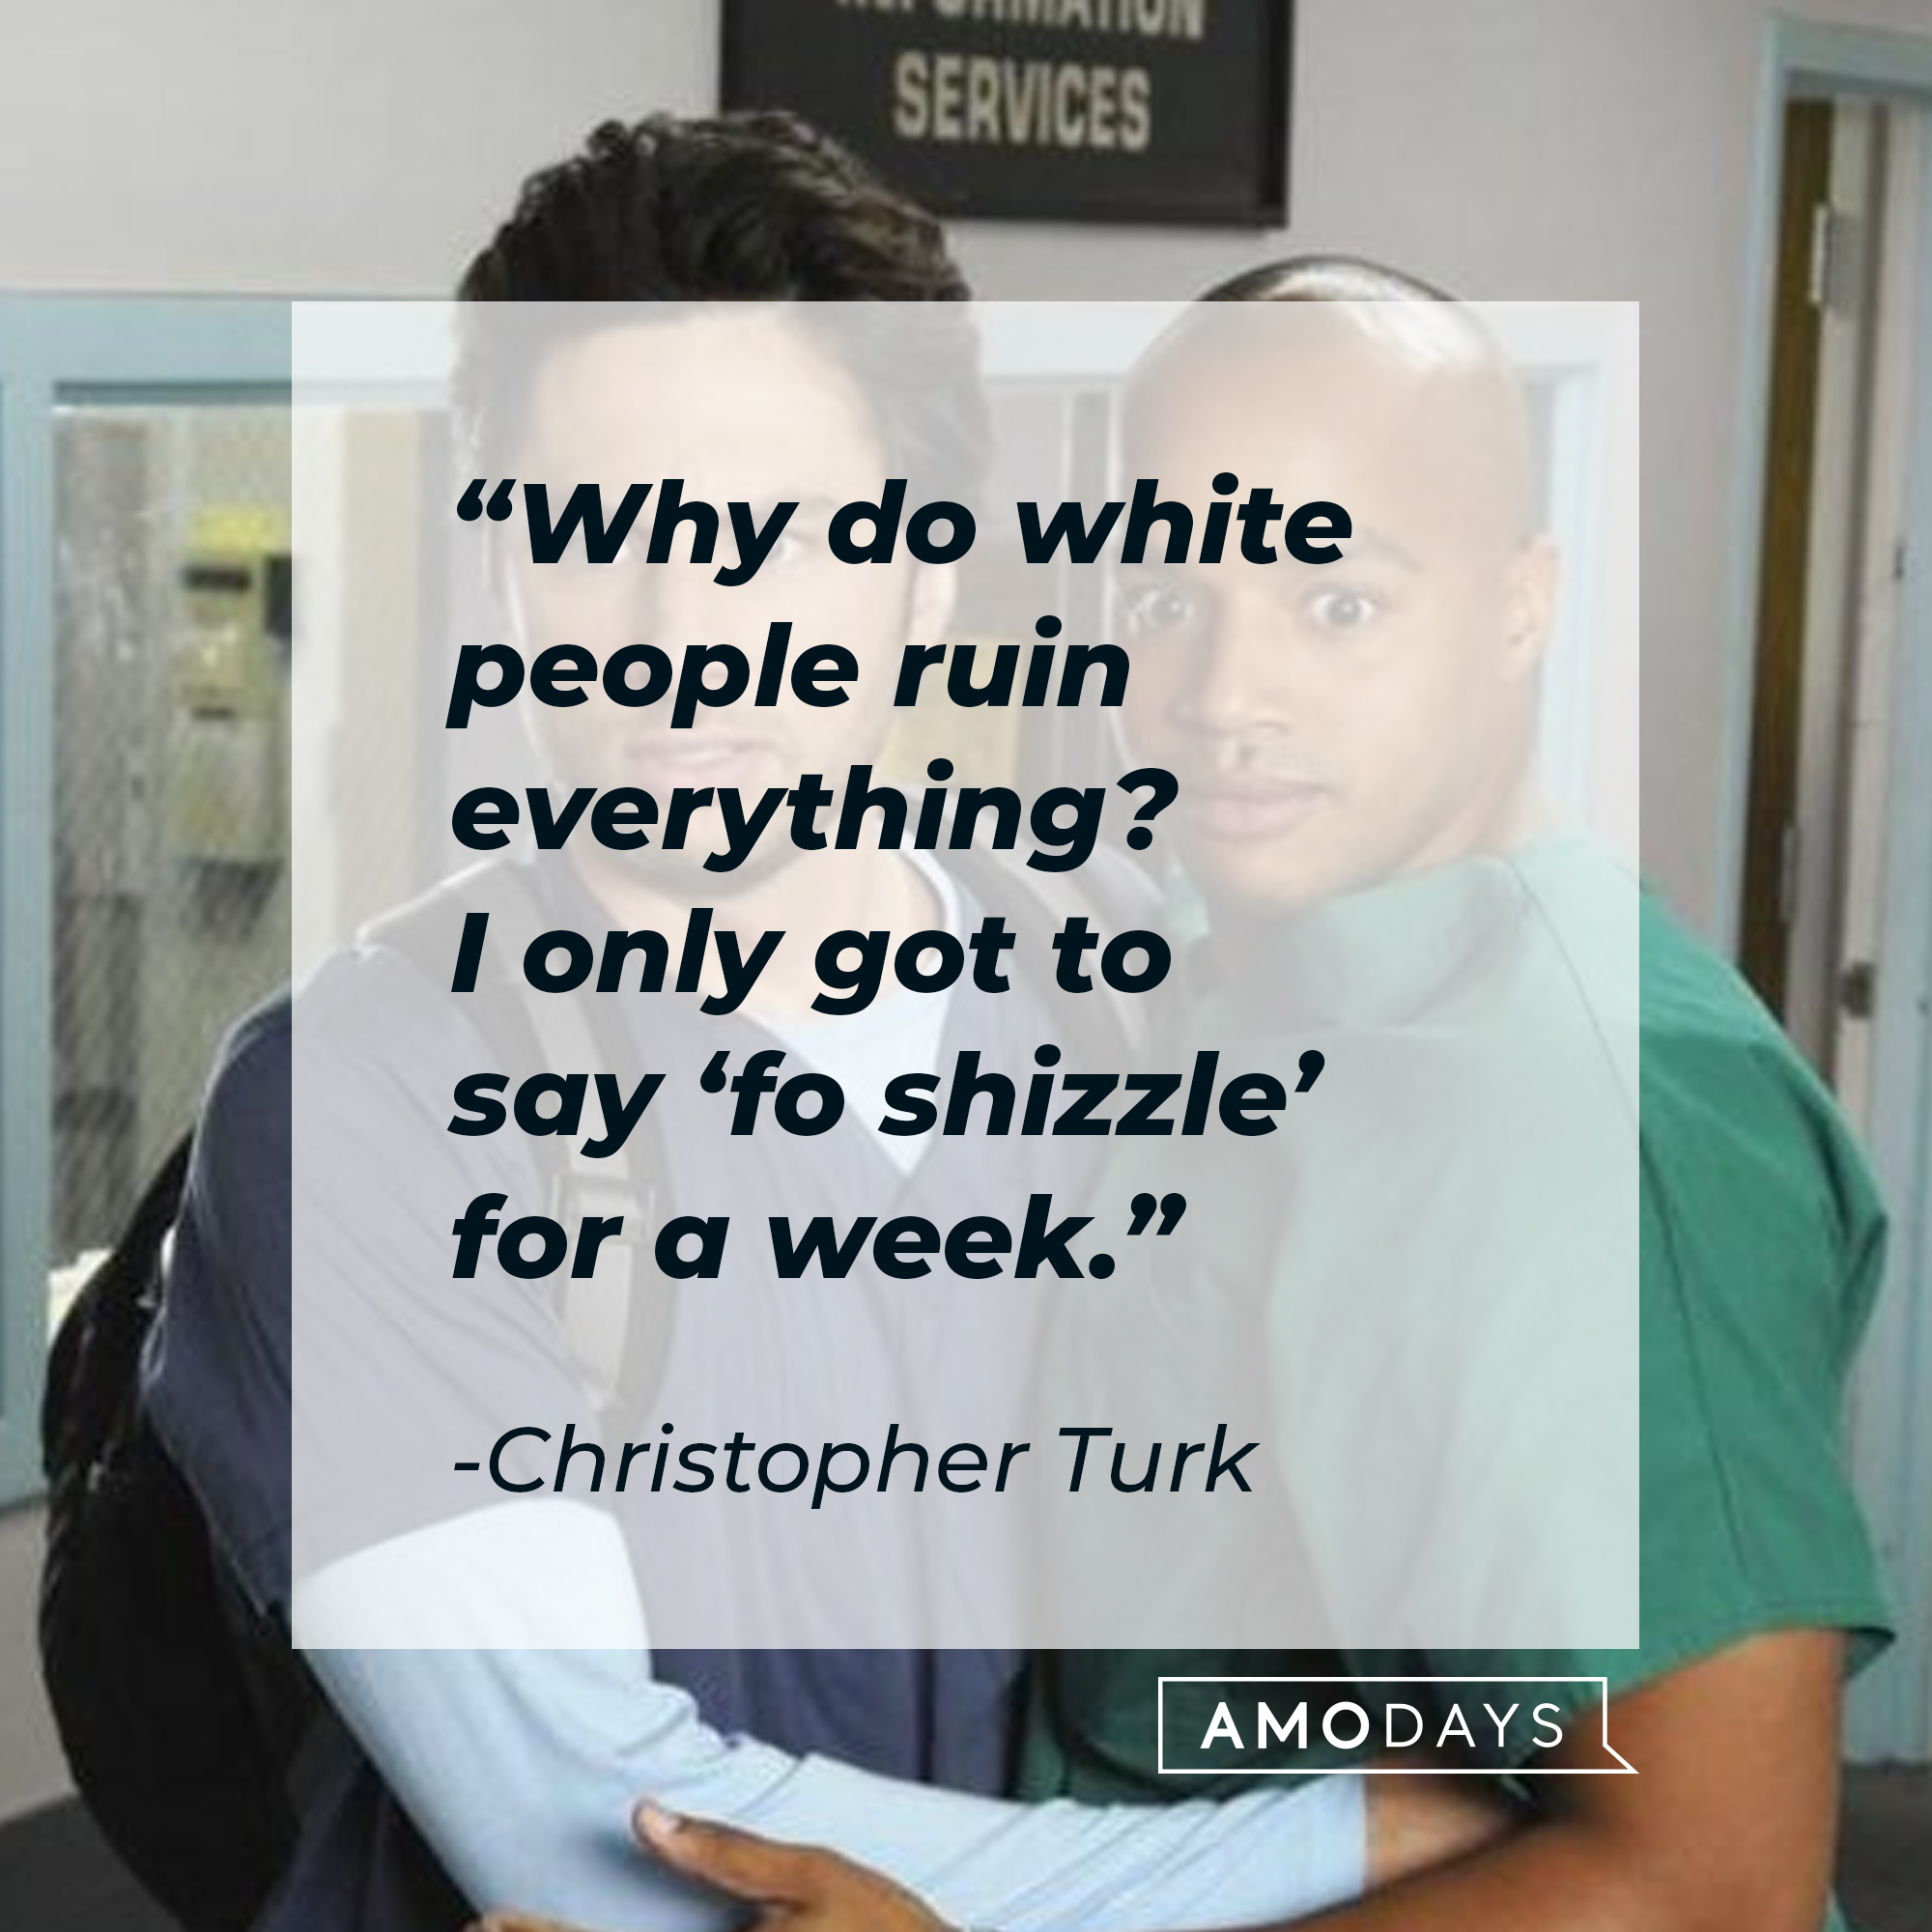 Christoper Turk and John 'J.D.' Dorian with Turk’s quote: “Why do white people ruin everything? I only got to say ‘fo shizzle’ for a week.” | Source: Facebook.com/scrubs